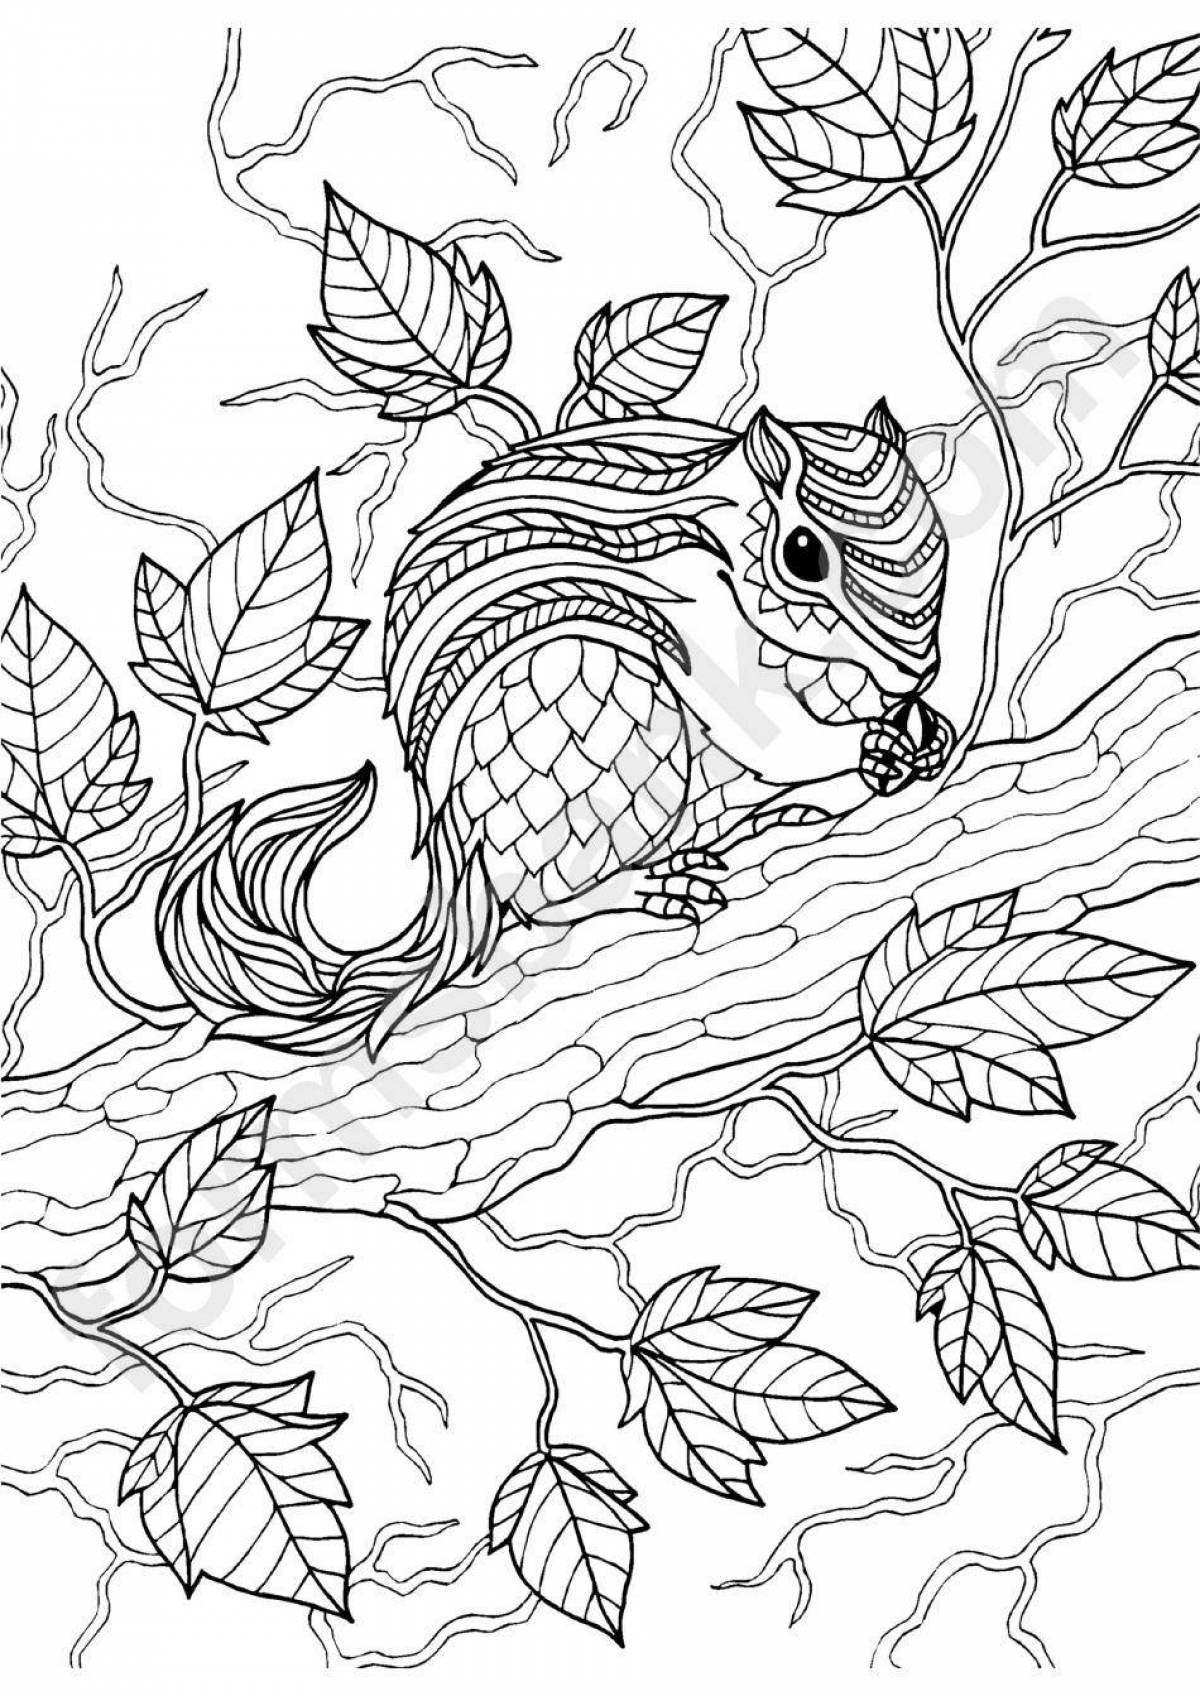 Great coloring pages with amazing animals